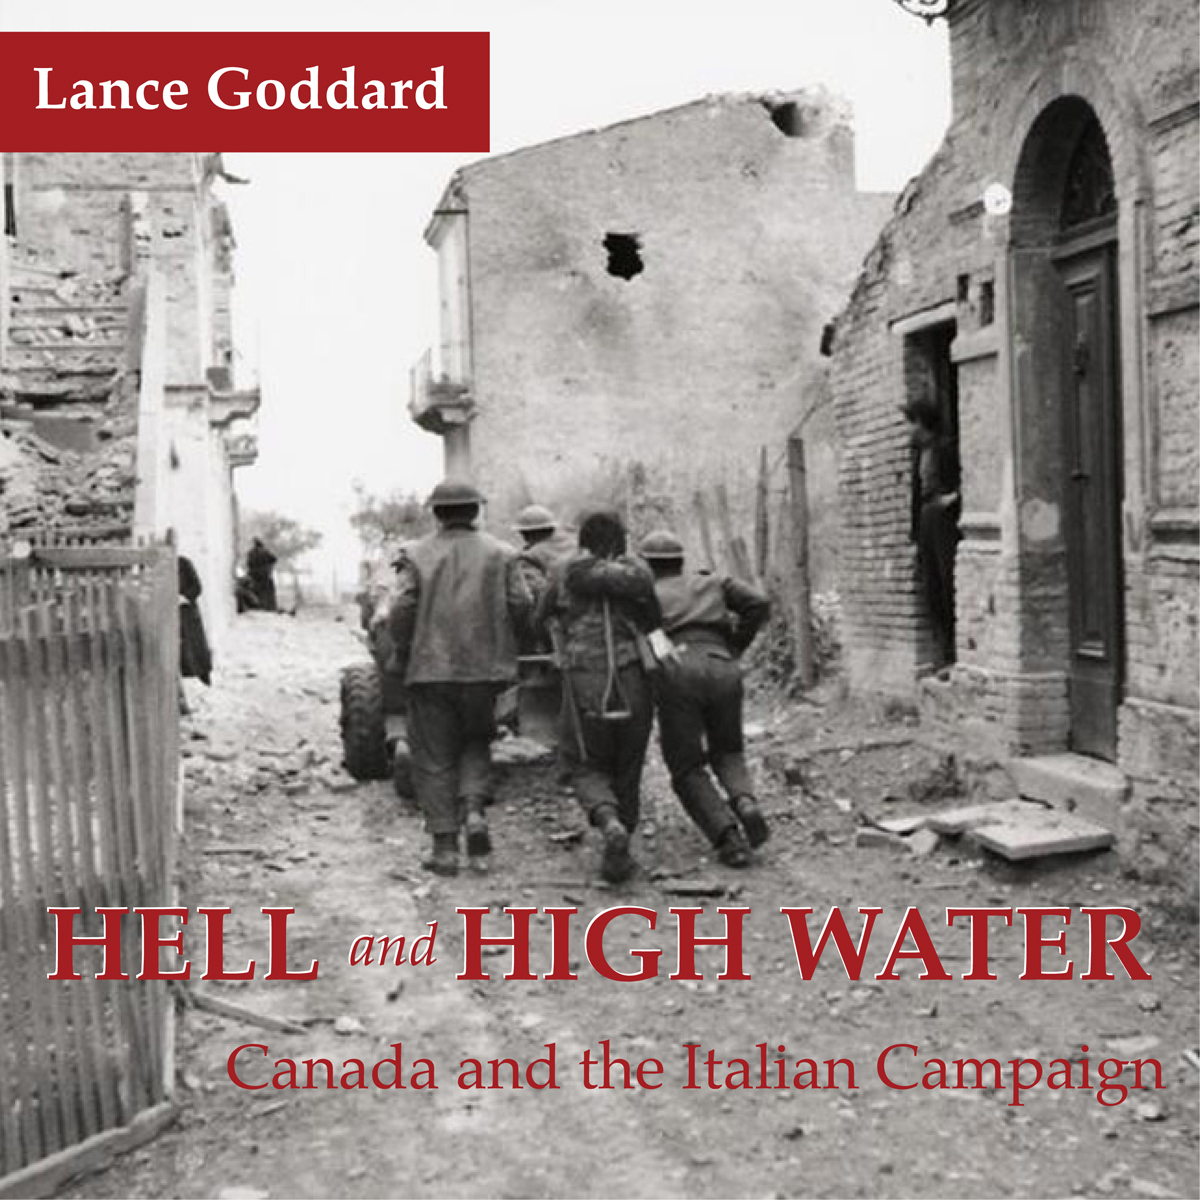 Hell and High Water by Lance Goddard